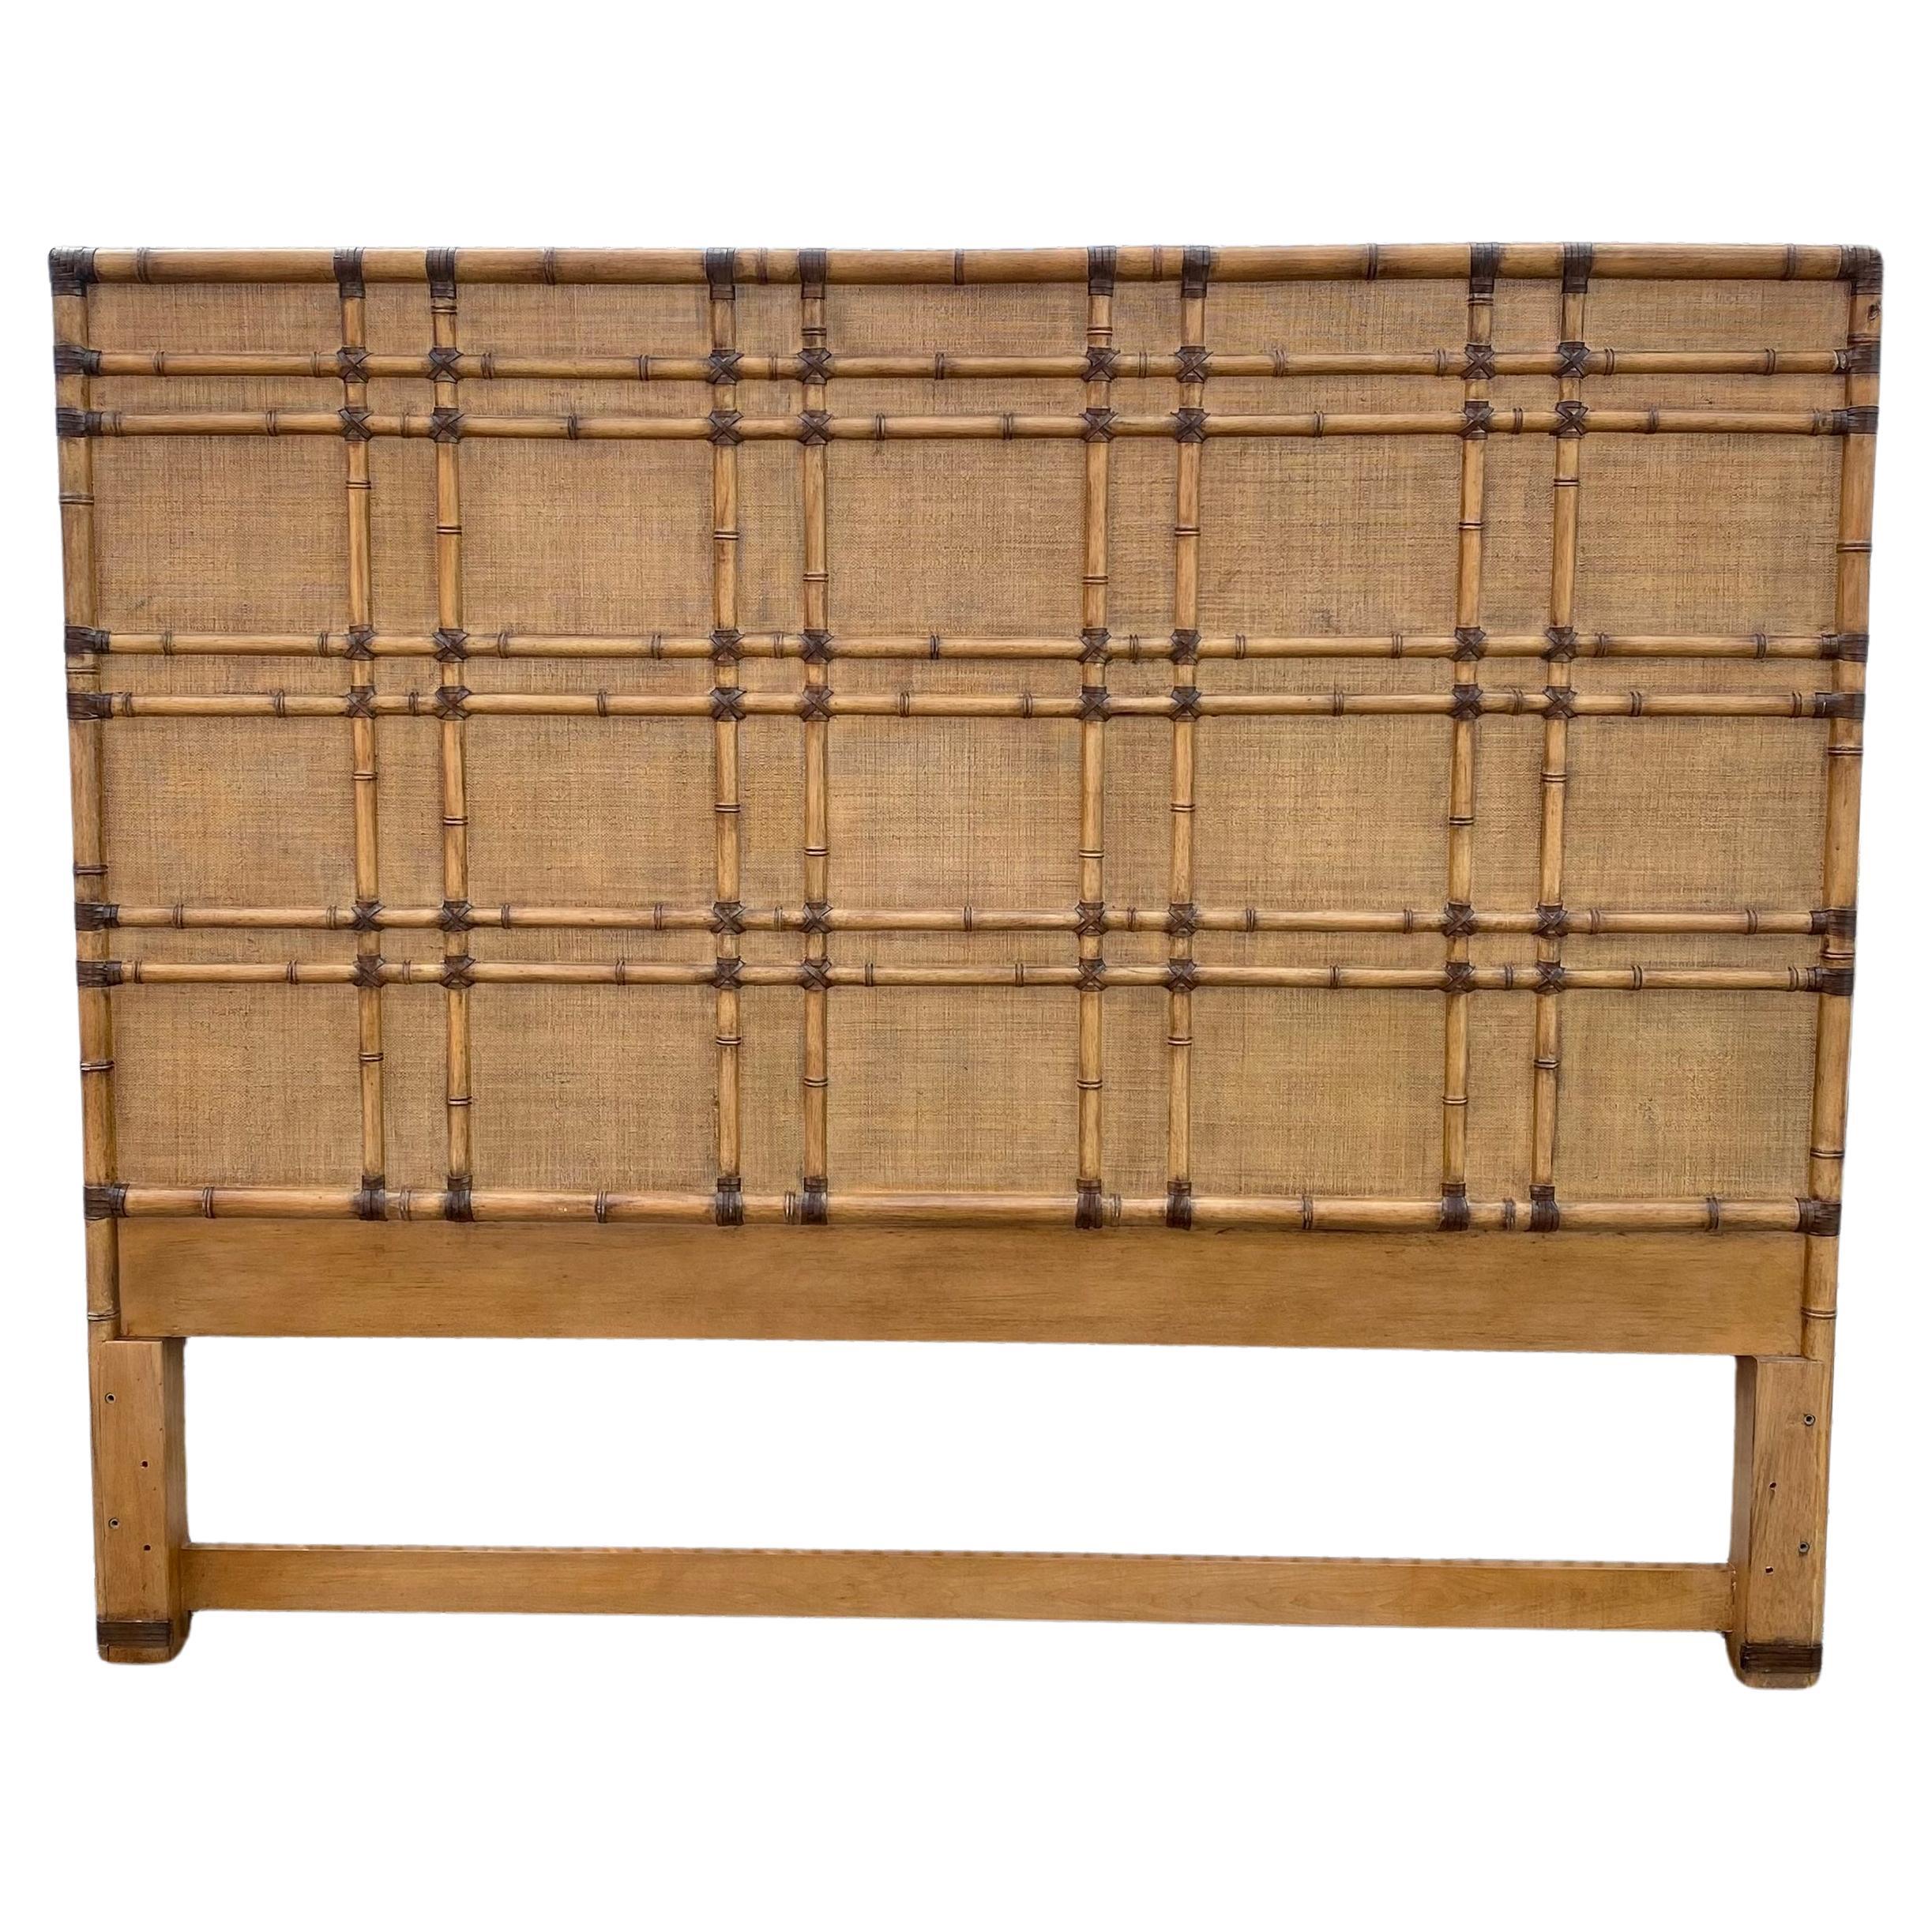 1990s Faux Rattan Bamboo Cane Leather Textured King Headboard